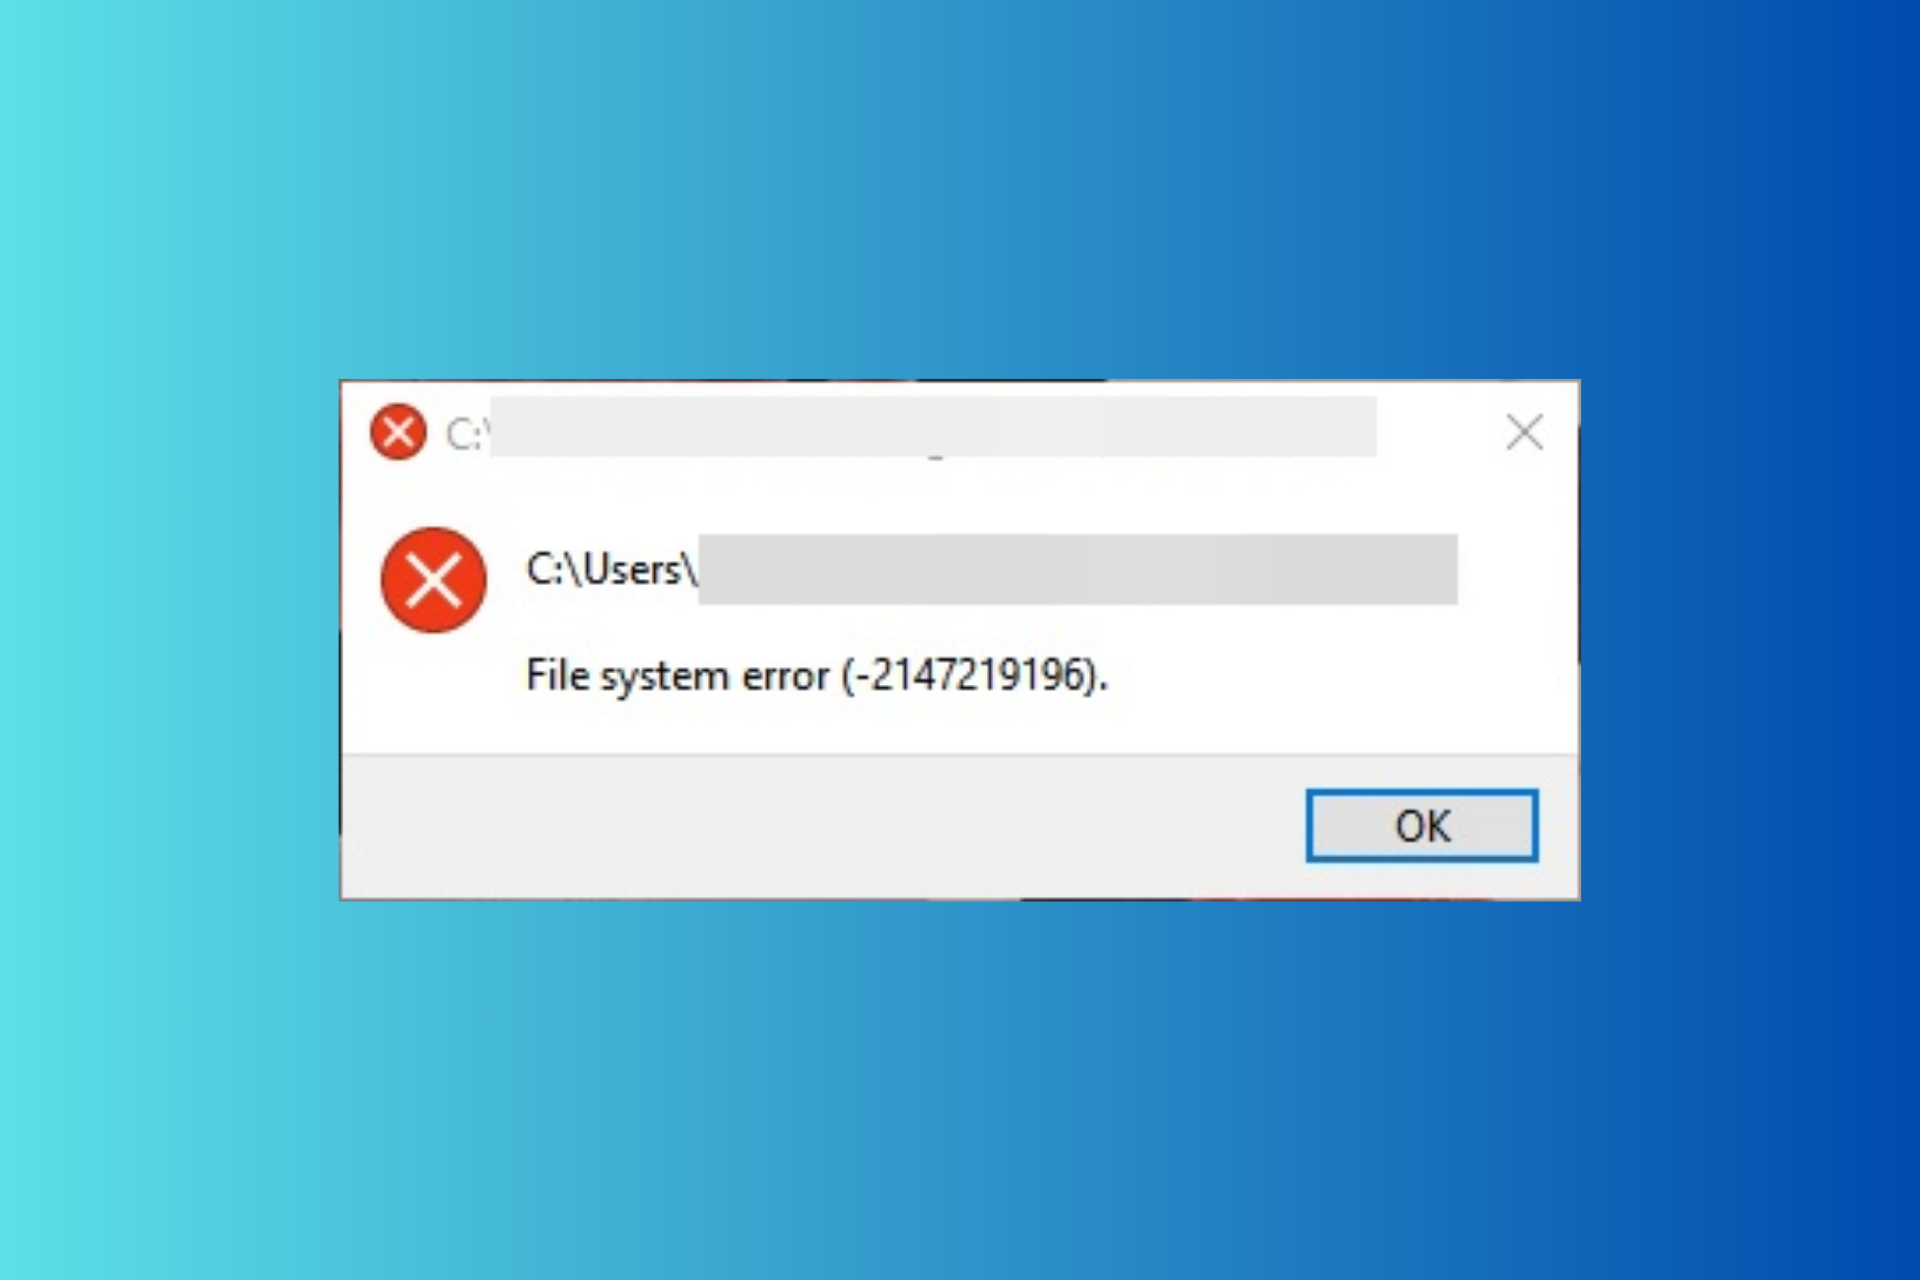 Microsoft confirmed: Windows 10 File system error (2147219196) is causing the app to crash